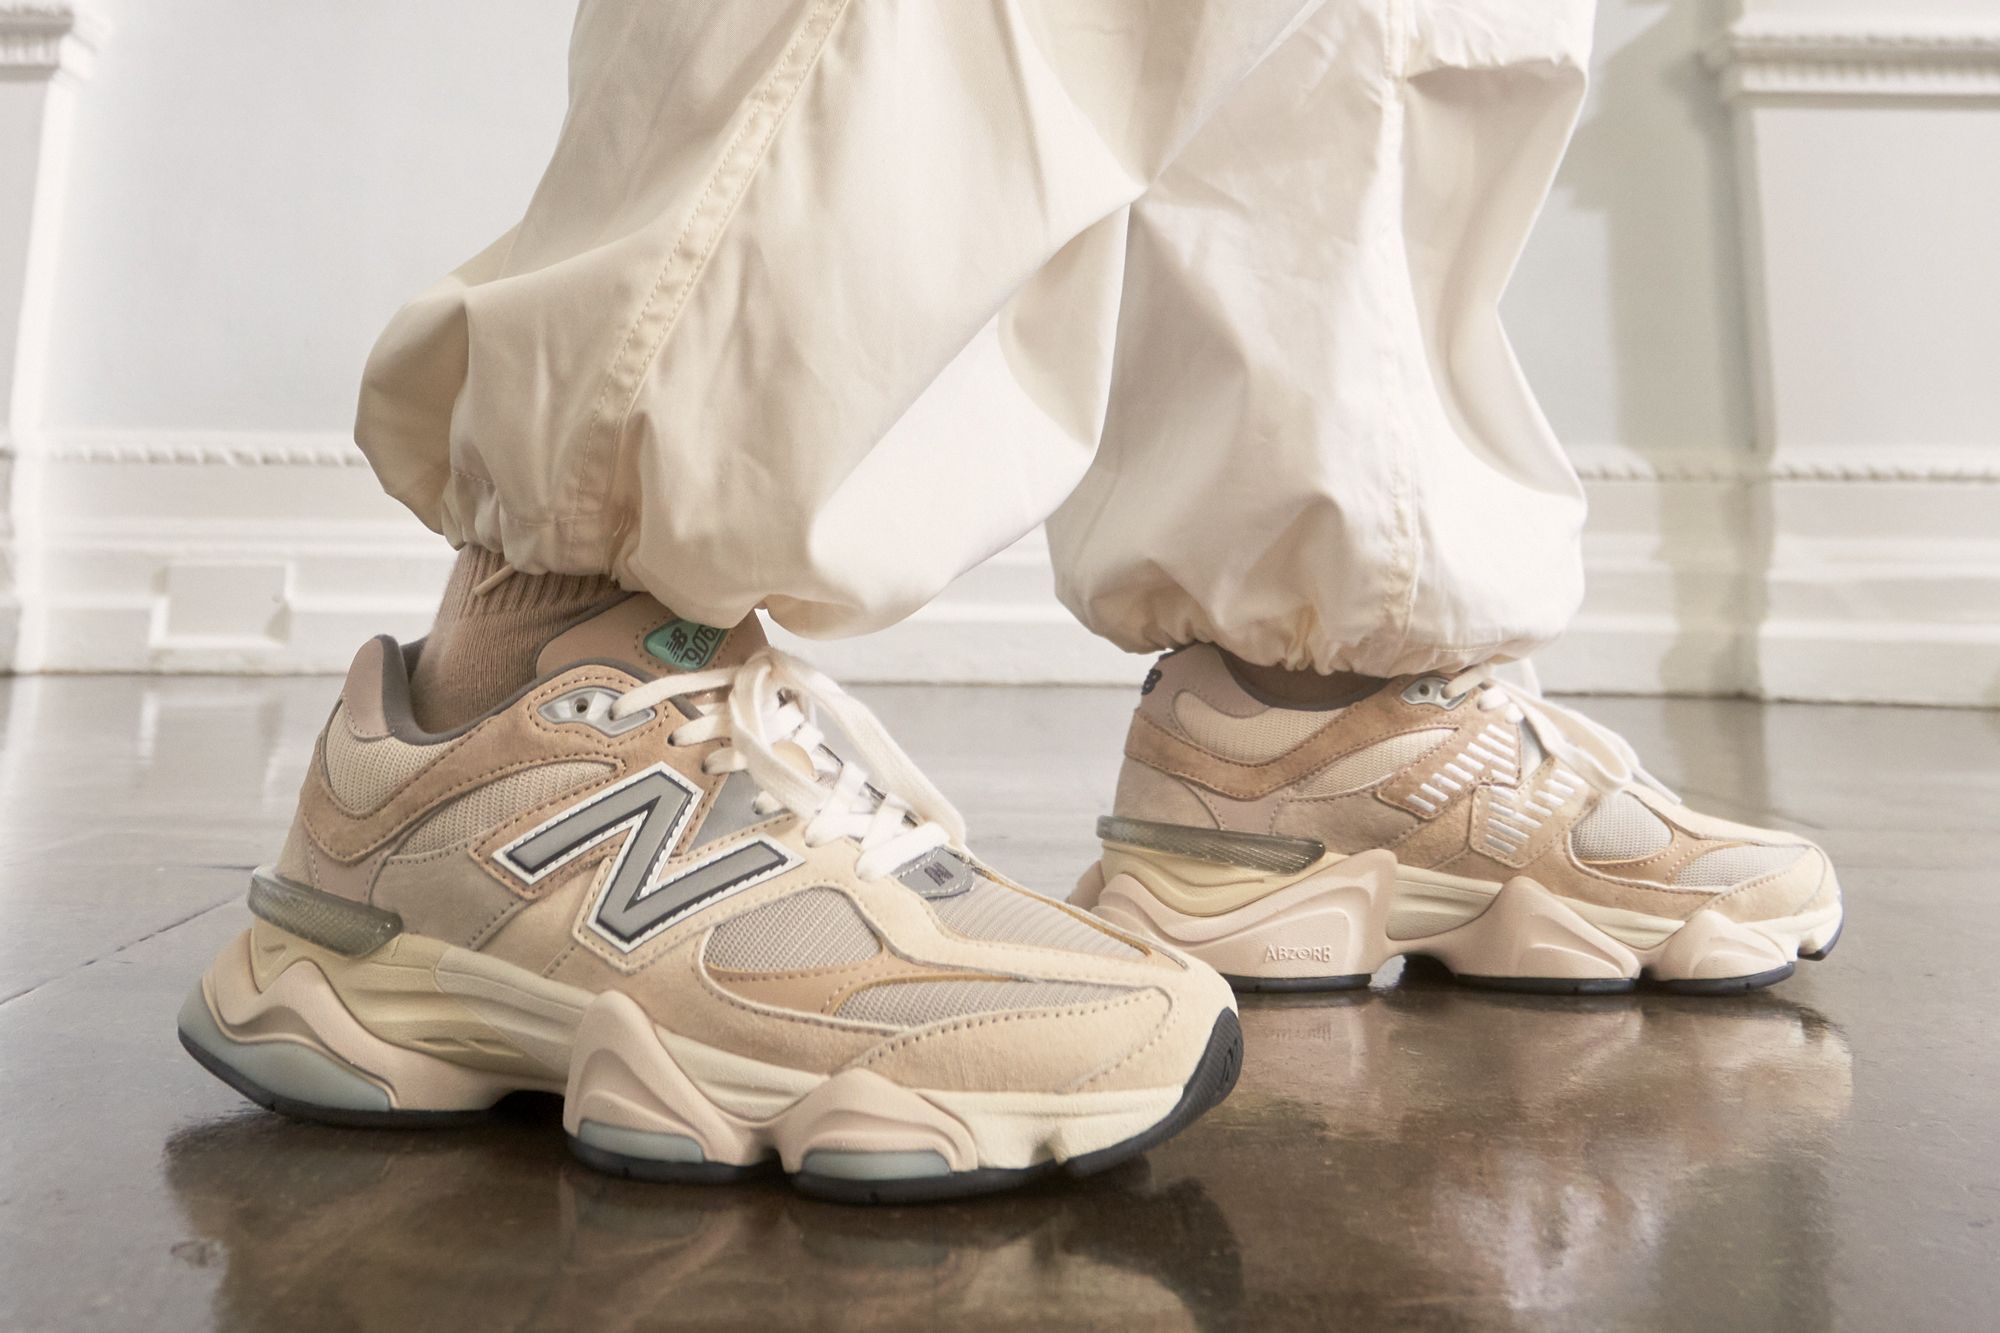 Retrofuturism Done Right: The Story of the New Balance 9060